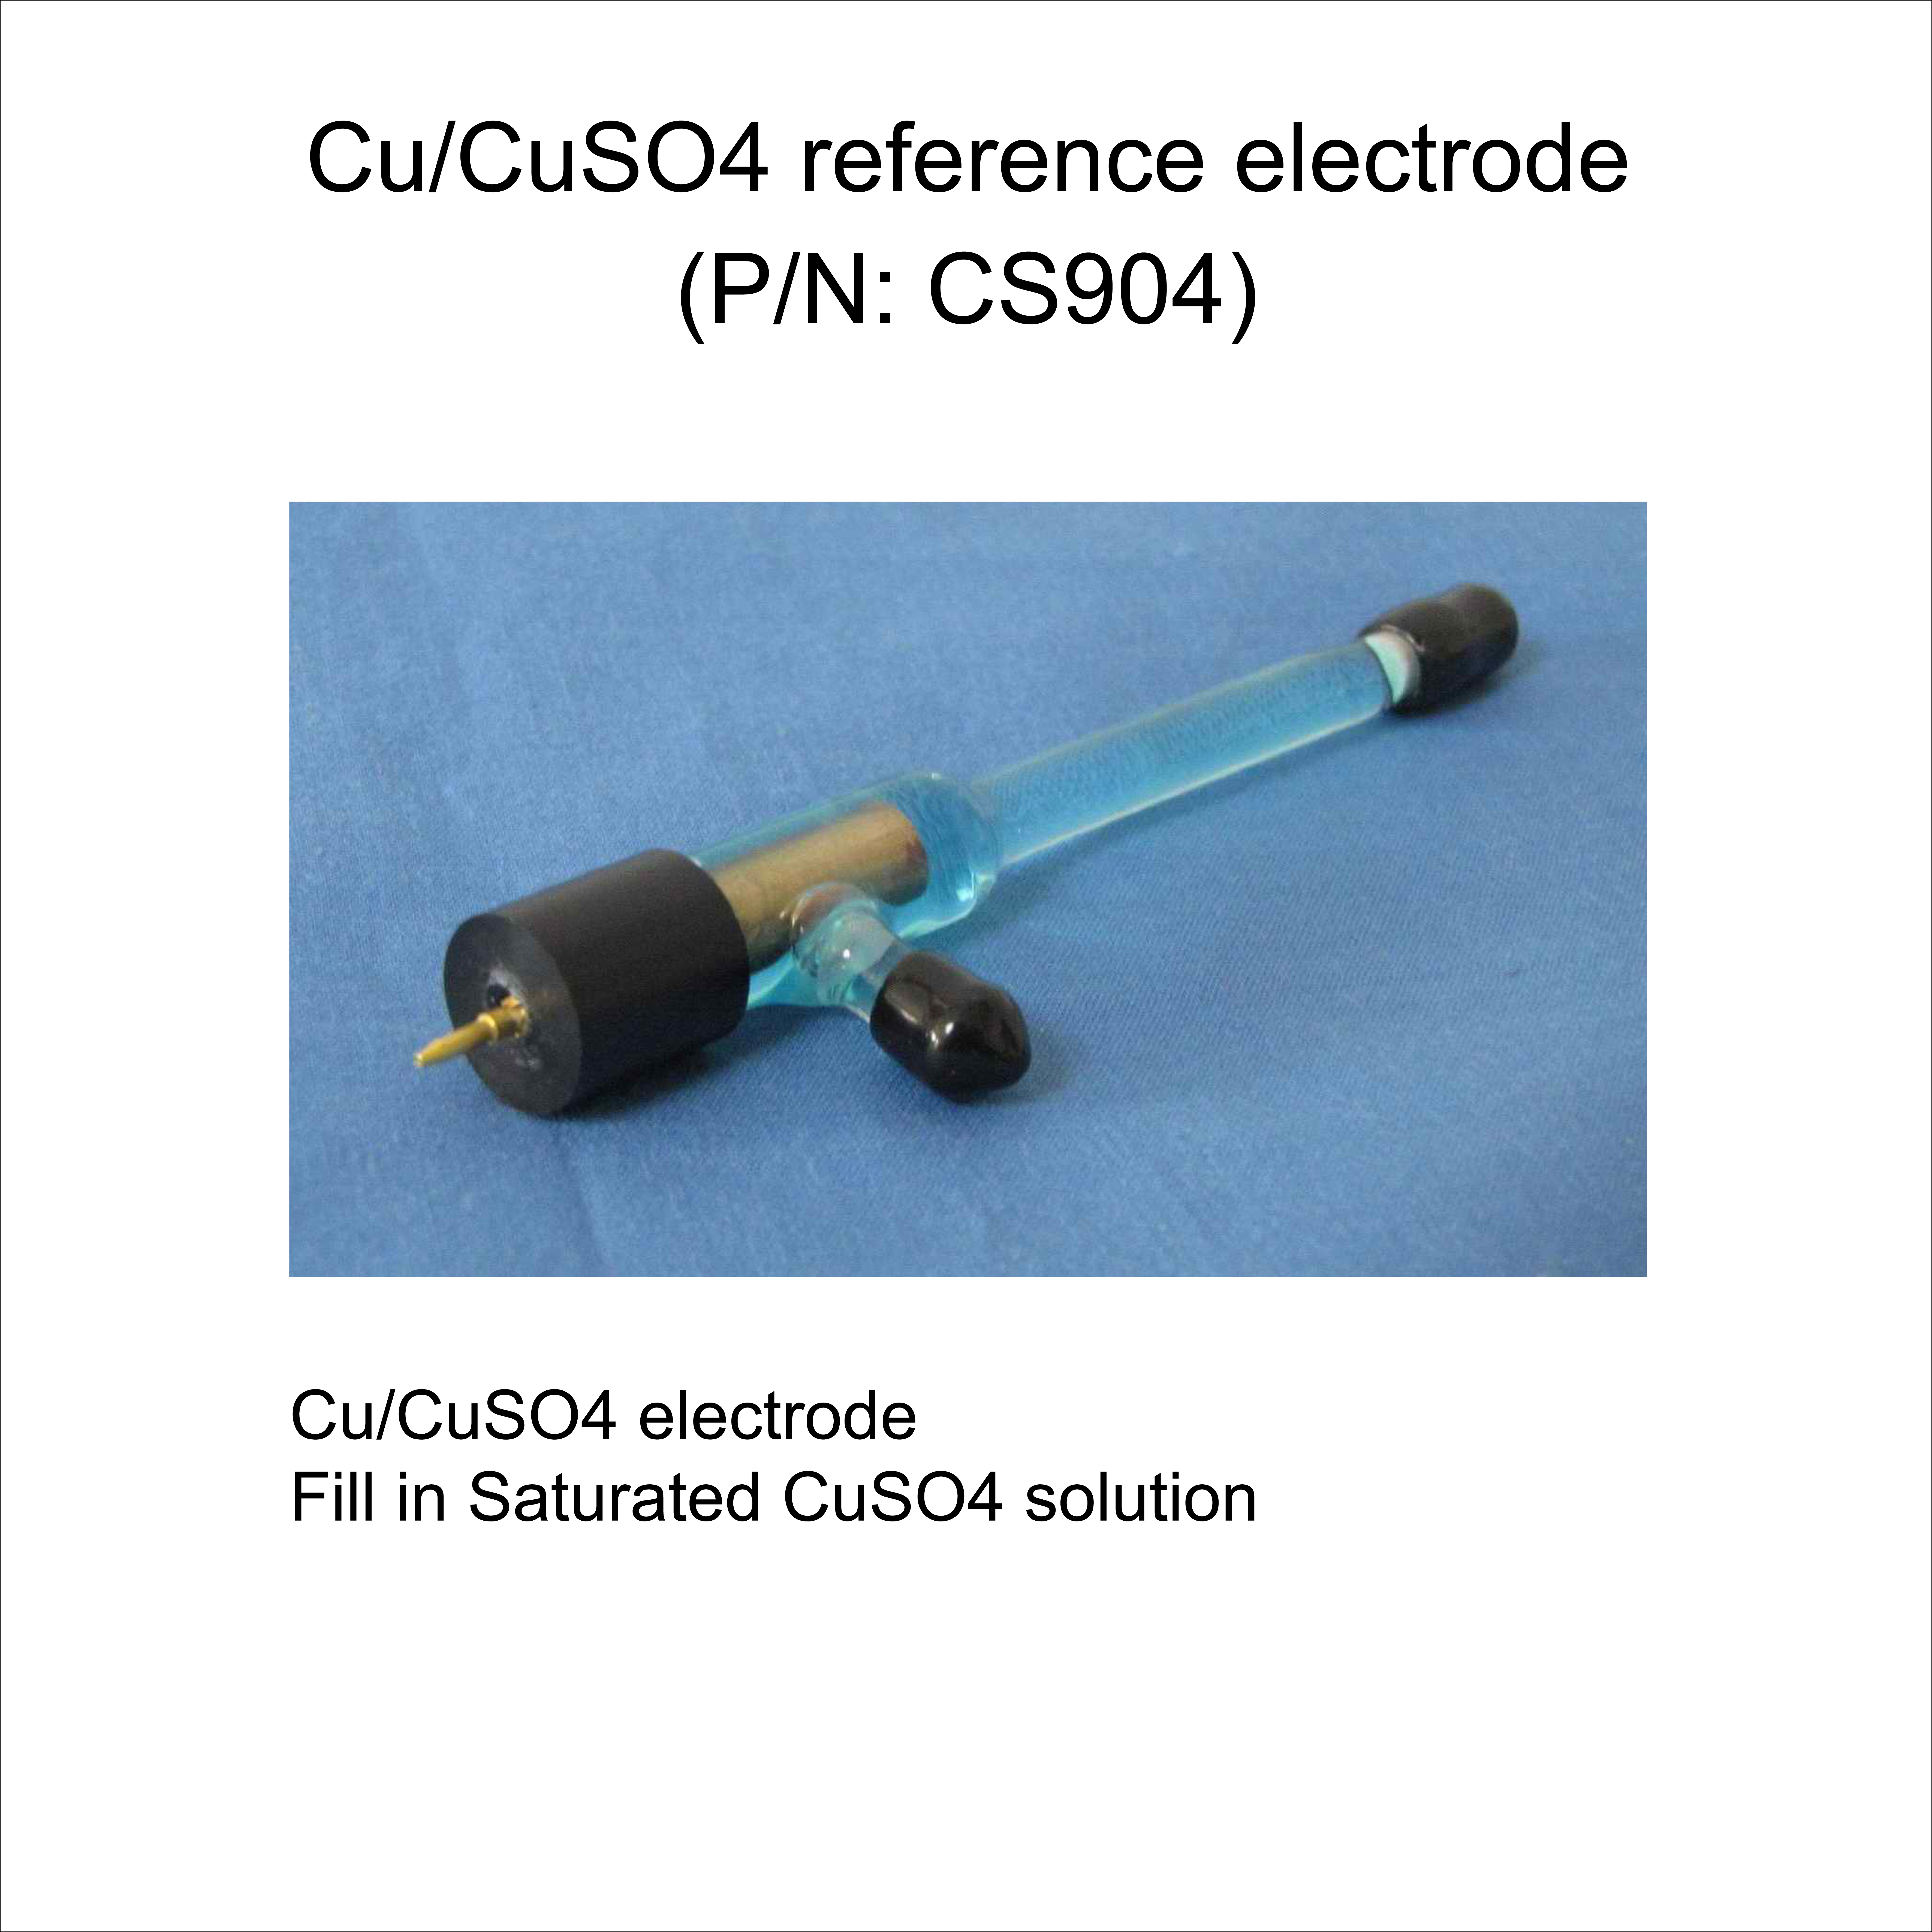 Cu/CuSO4 reference electrode